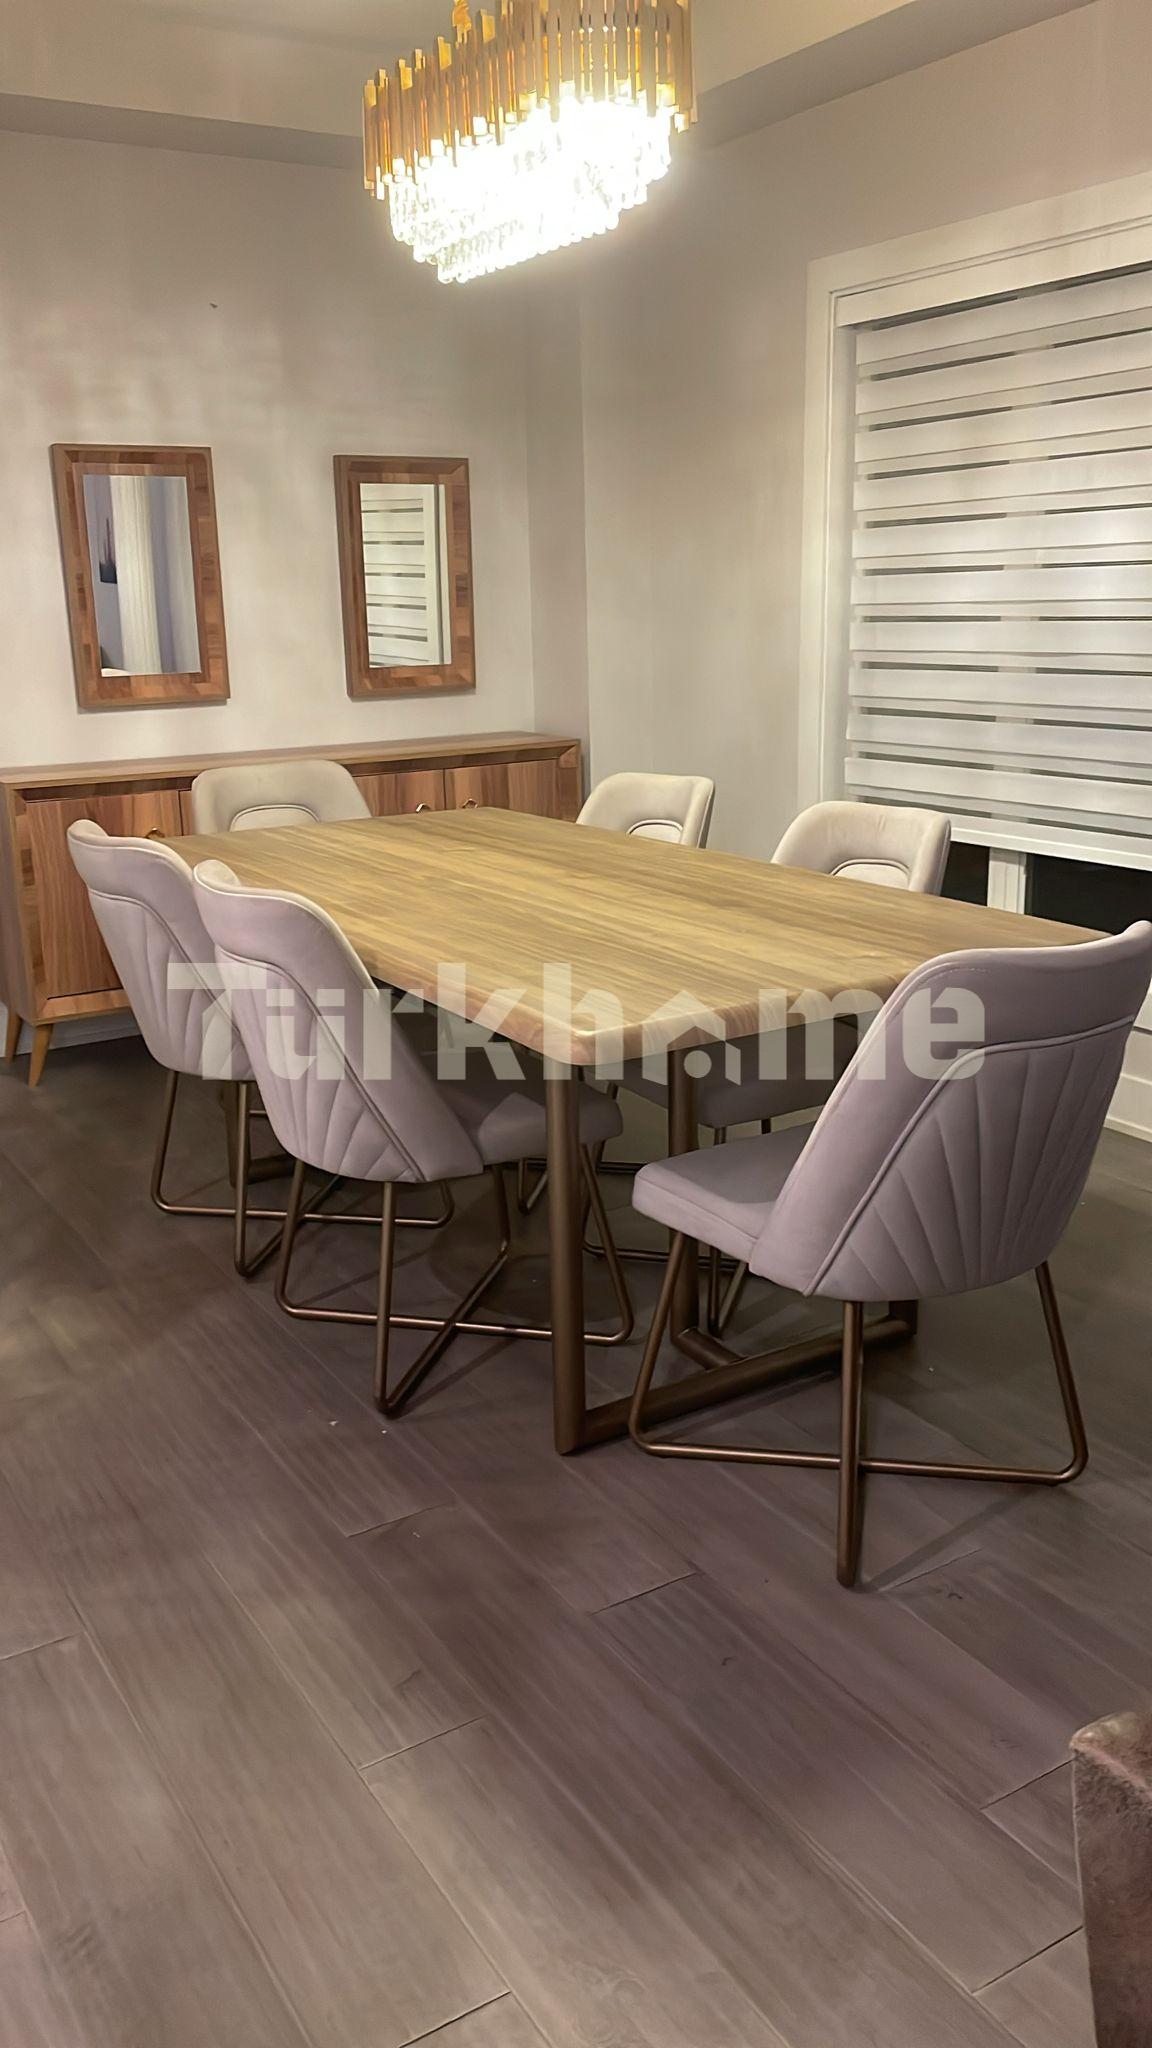 Oslo walnut Dining Table + 6 Chairs